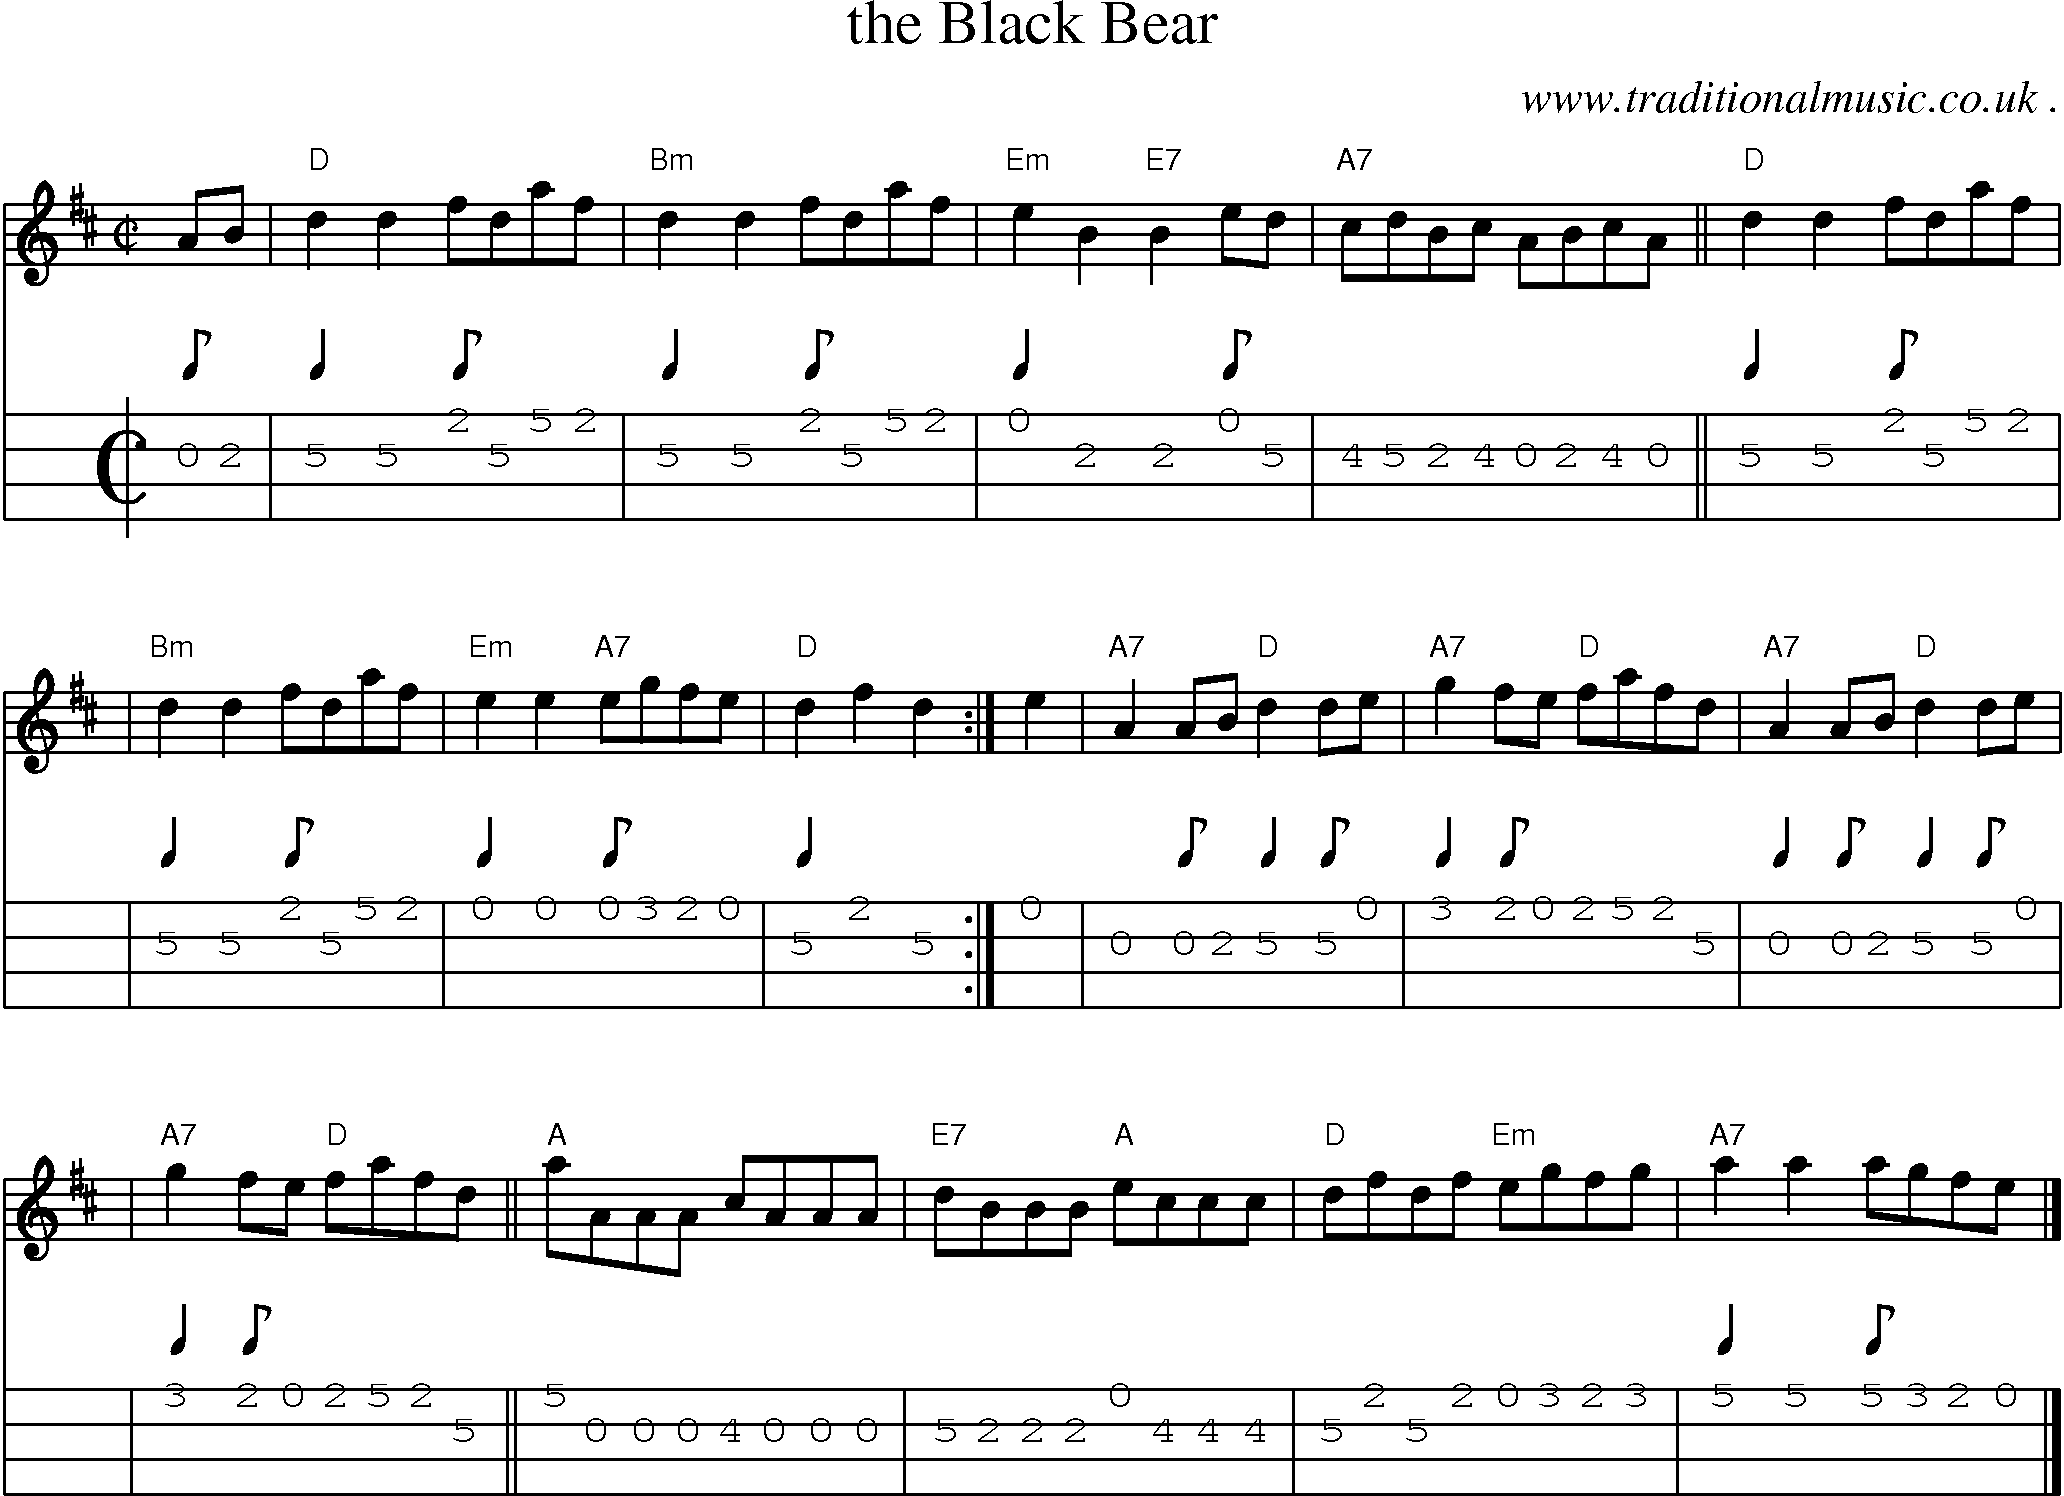 Sheet-music  score, Chords and Mandolin Tabs for The Black Bear